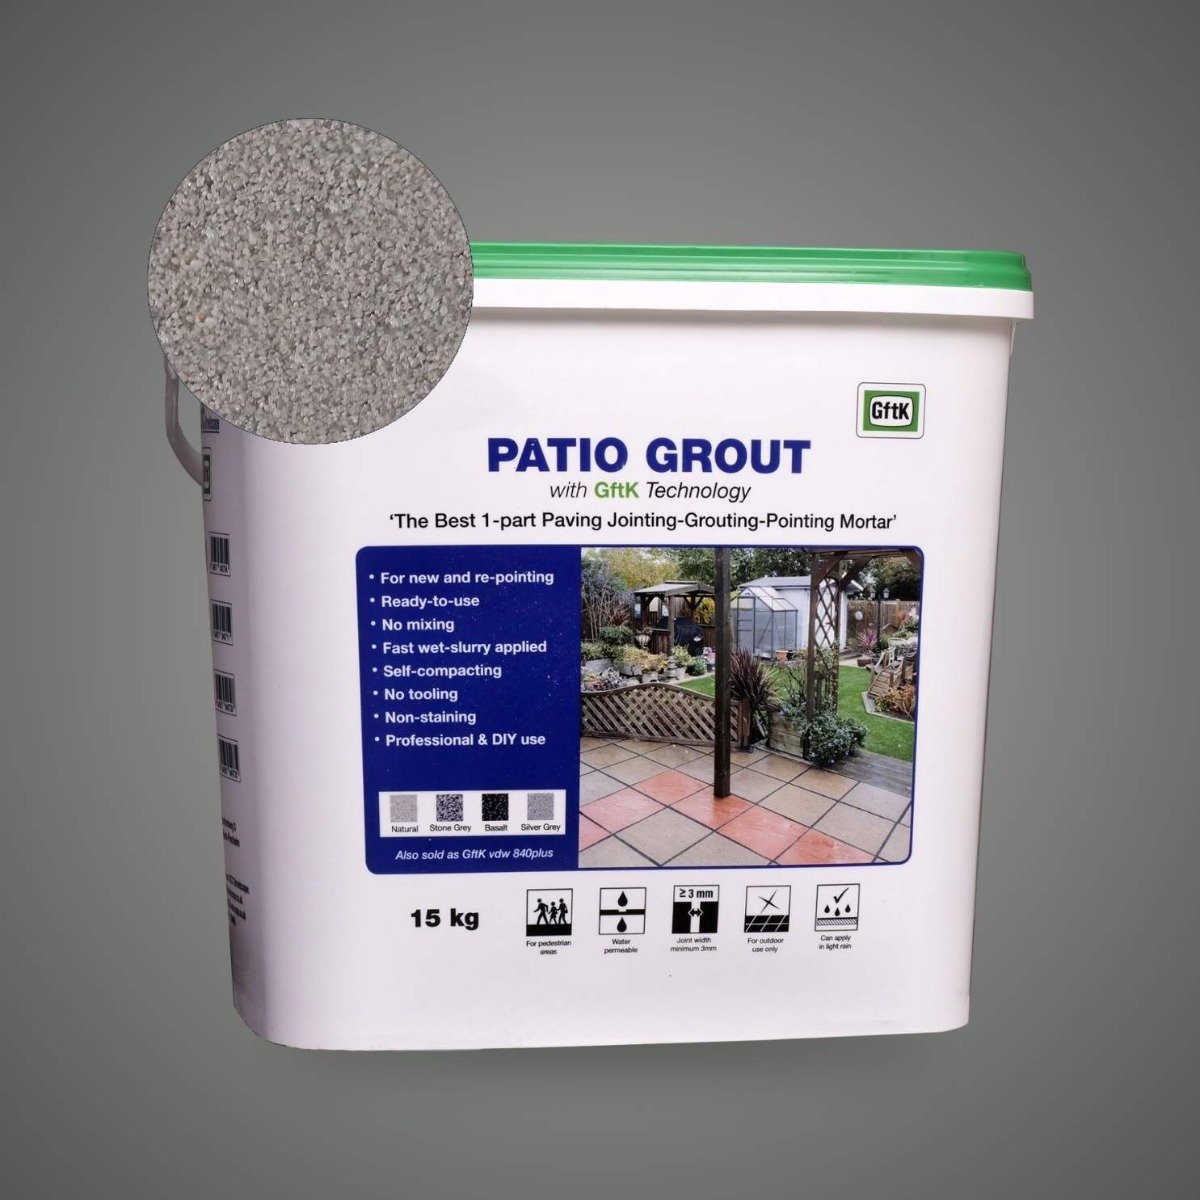 GftK_Patio Grout, 15kg-Brush In, ideal for DIYers-Silver Grey